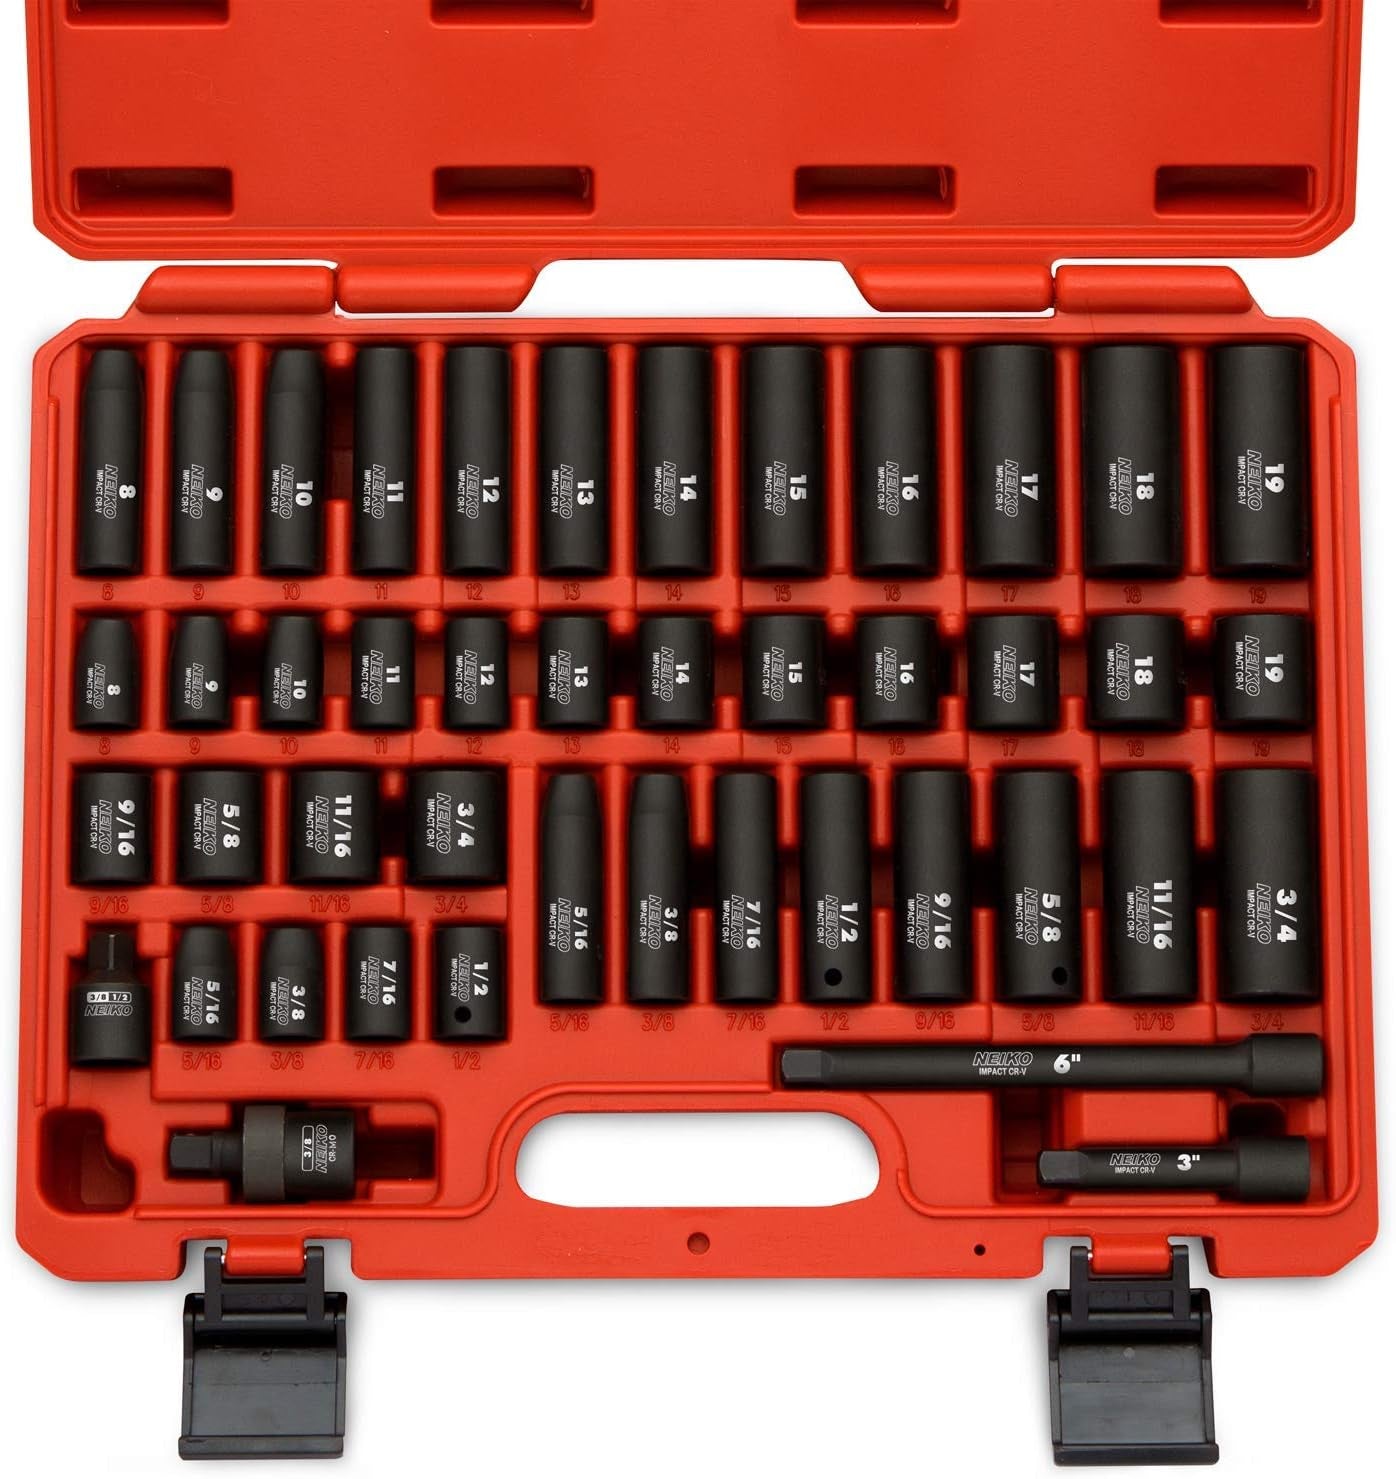 02440A 3/8-Inch-Drive Impact Socket Set, SAE Sizes 5/16" to 3/4" and Metric Sizes 8 Mm to 19 Mm, Includes Extension Bars and U-Joint, 44 Pieces